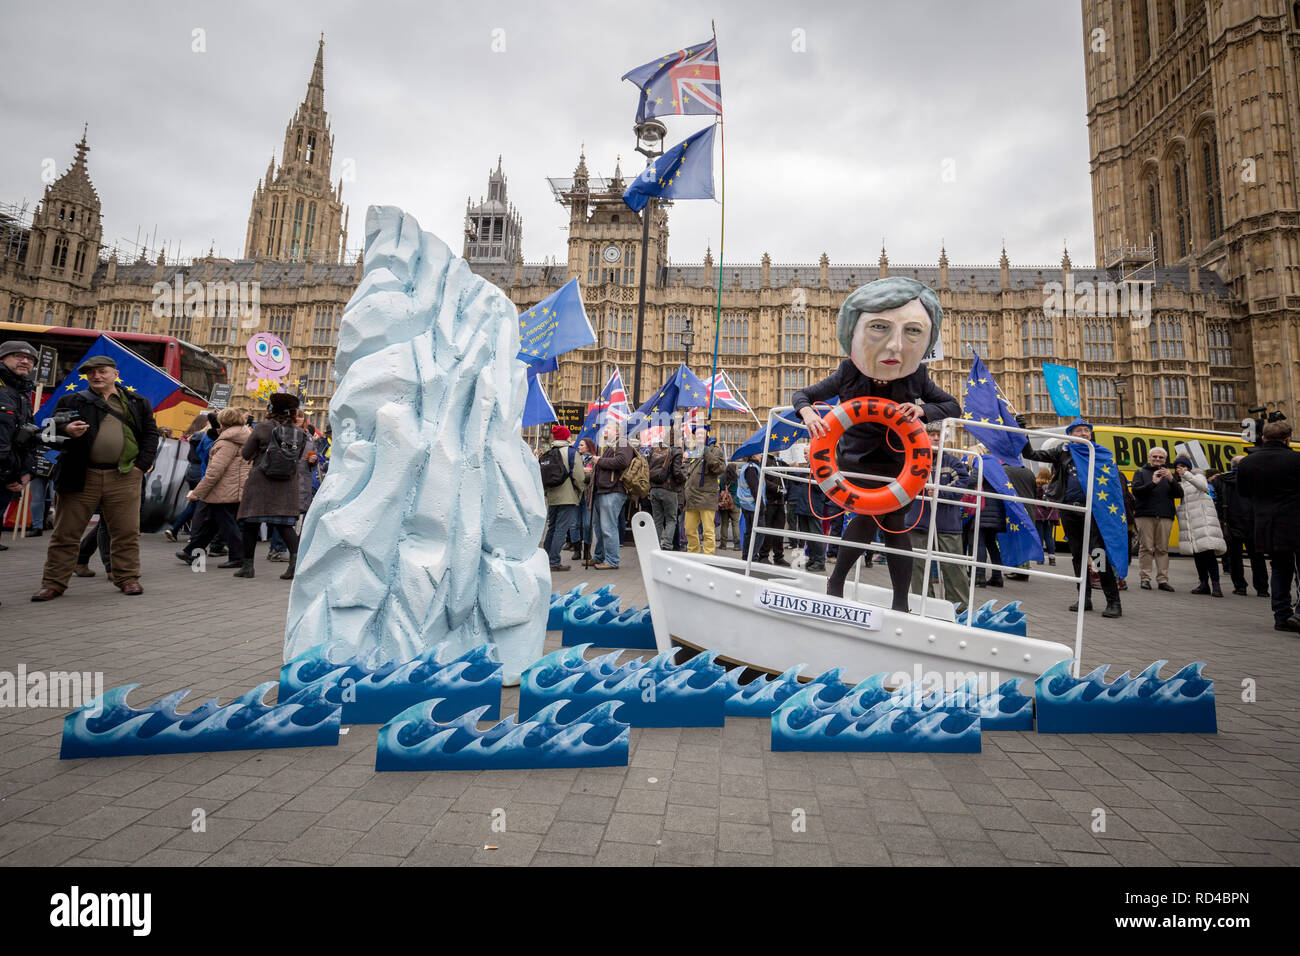 London, UK. 15th January 2019. Pro-Brexit and Remain protest groups outside Westminster's Parliament buildings on the day of the ‘meaningful vote’ on Prime Minister’s Theresa May’s Brexit withdrawal deal. Credit: Guy Corbishley/Alamy Live News Stock Photo